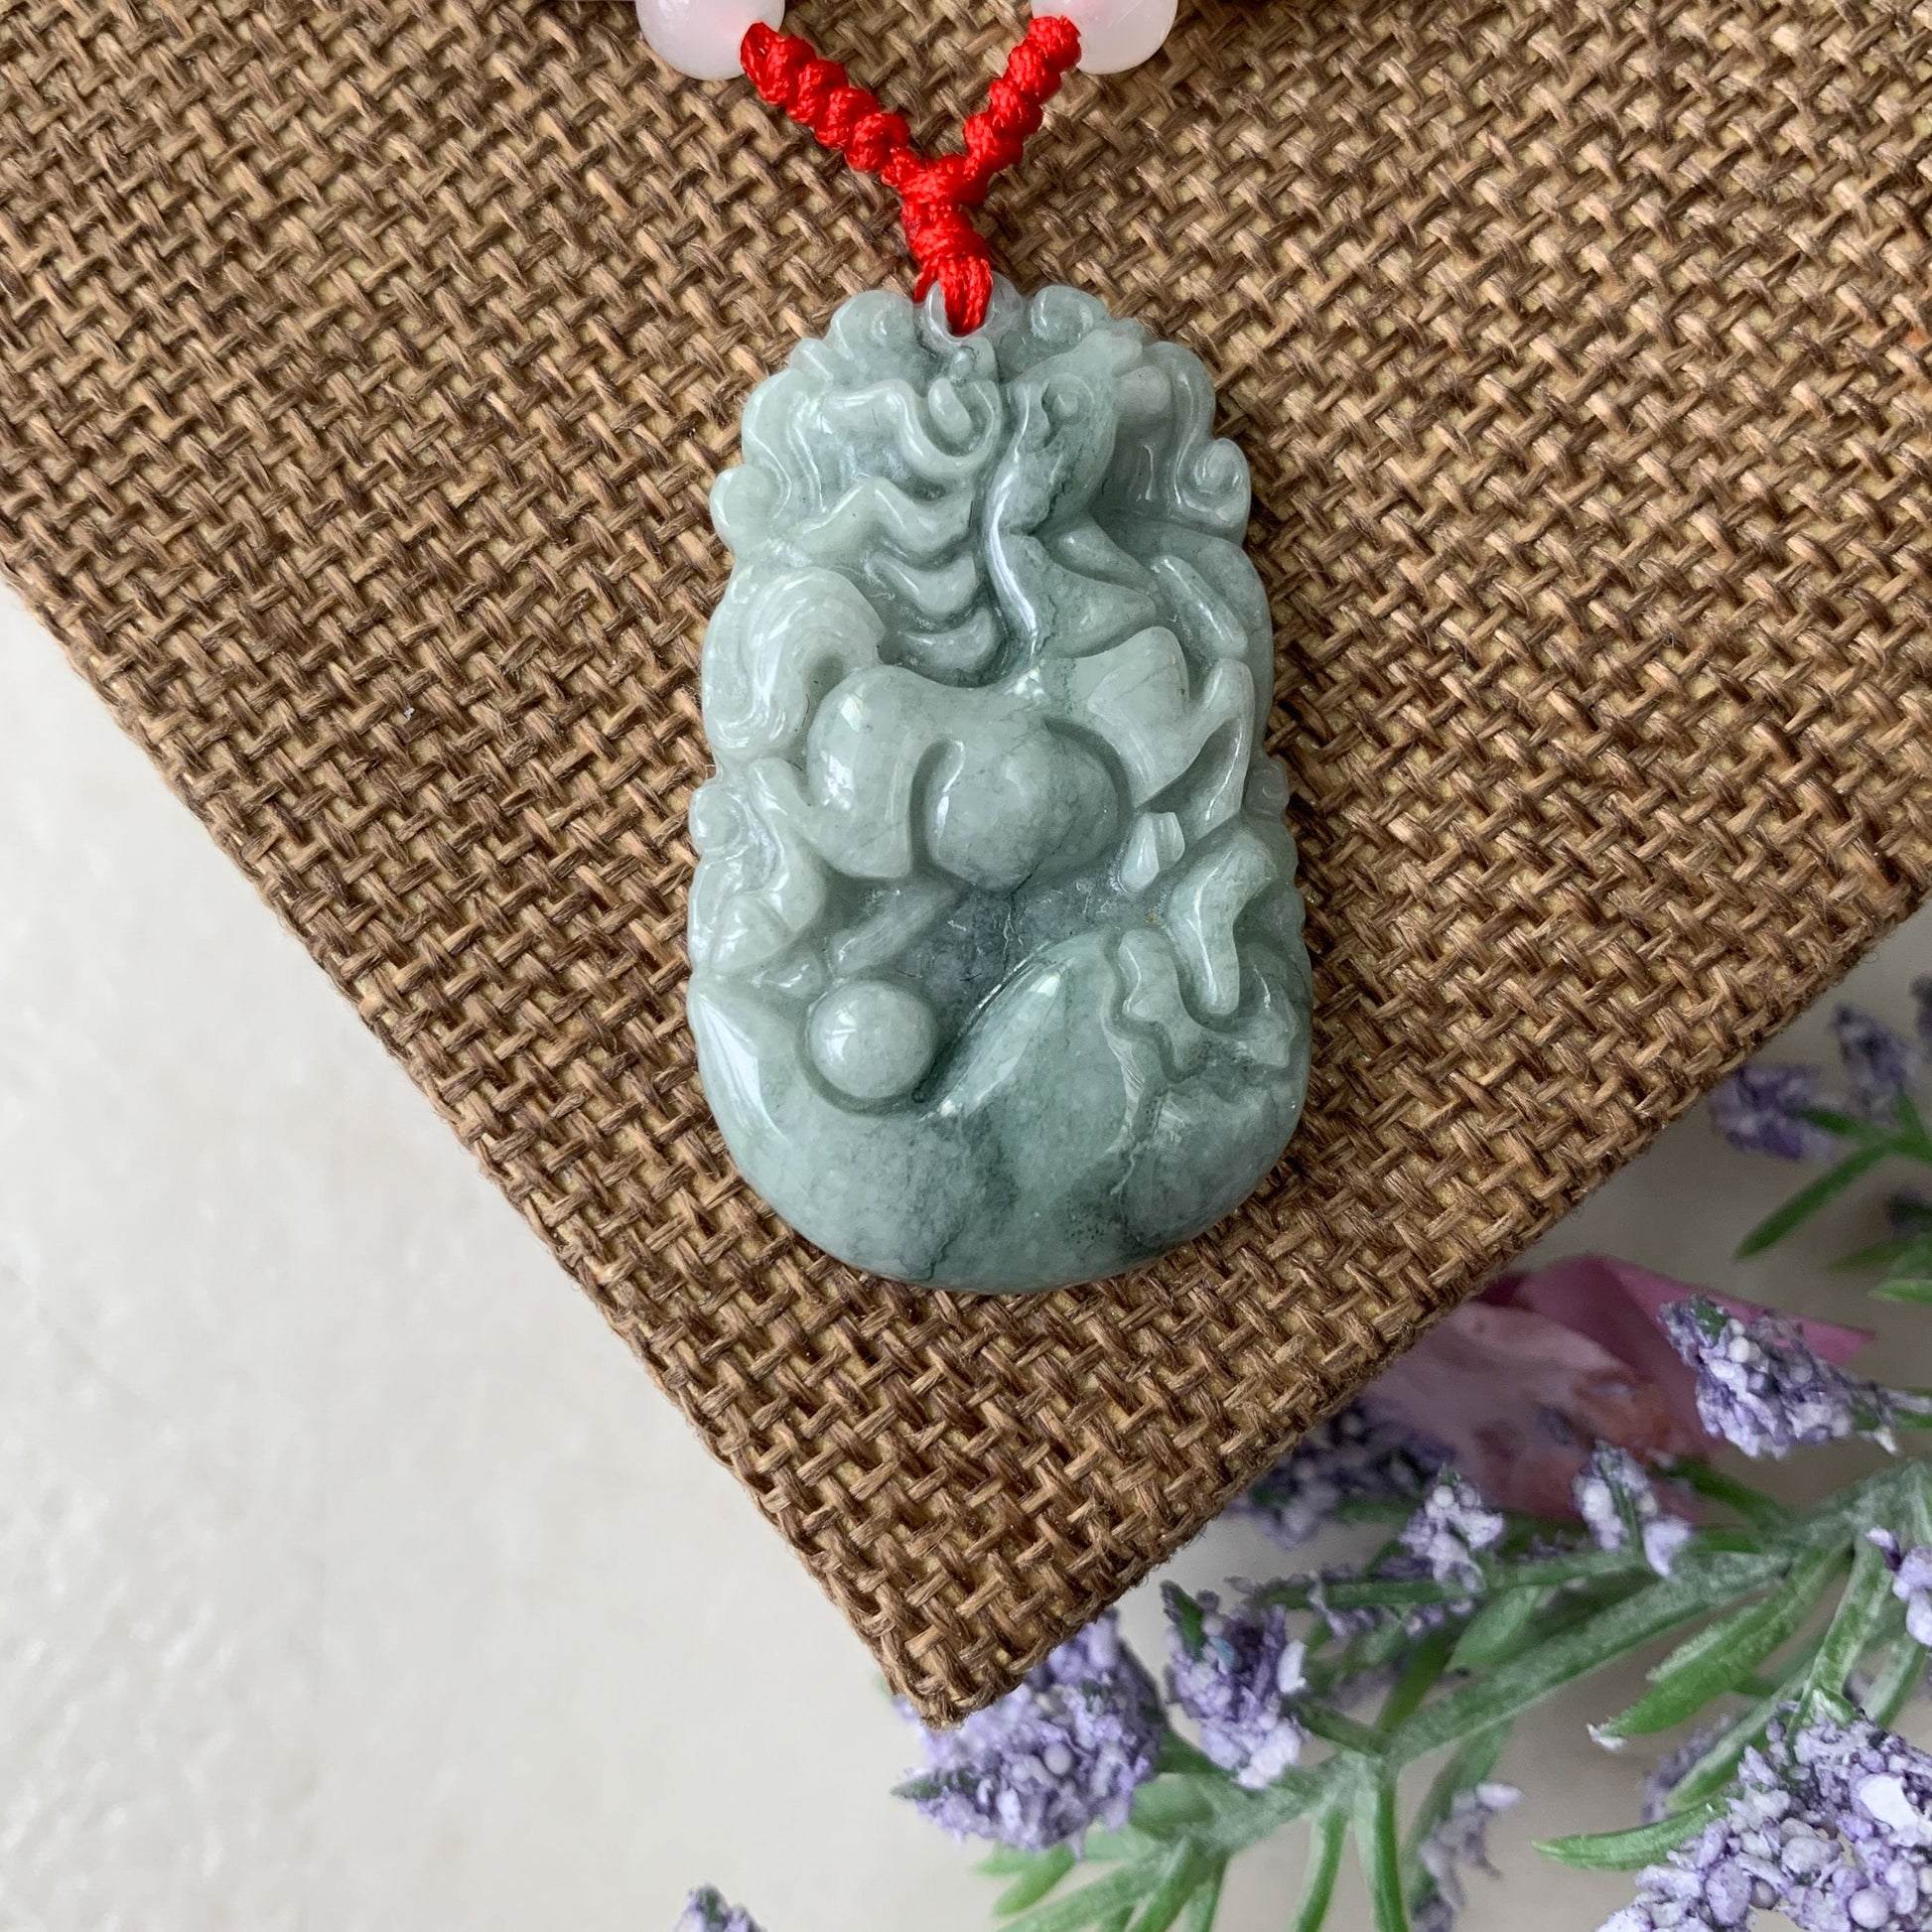 Horse Jadeite Chinese Zodiac Rustic Carved Pendant Necklace, YW-0110-1646804429 - AriaDesignCollection